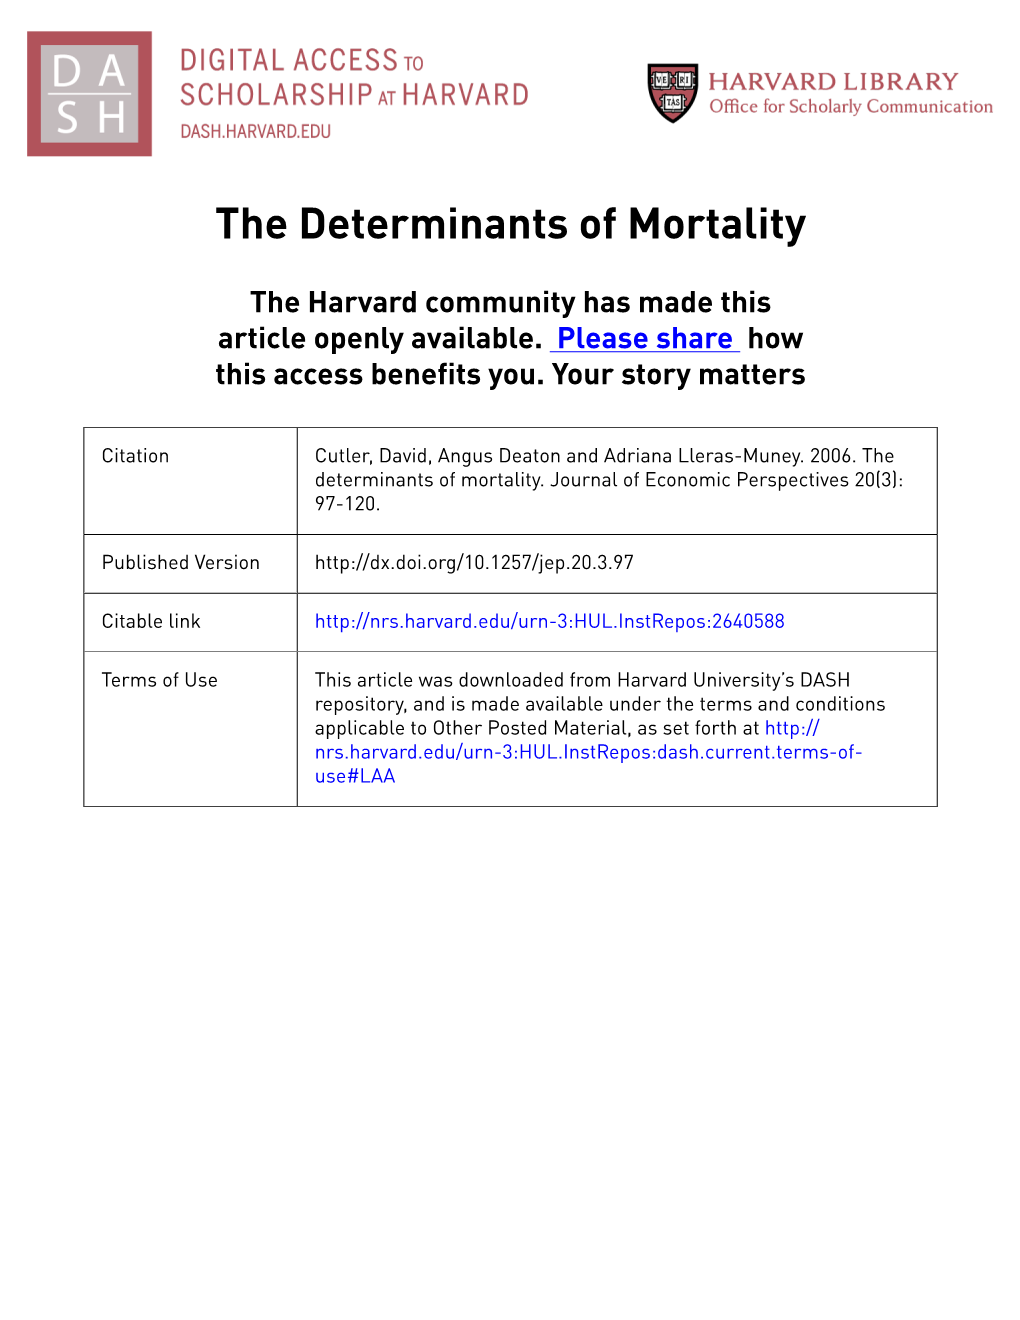 The Determinants of Mortality